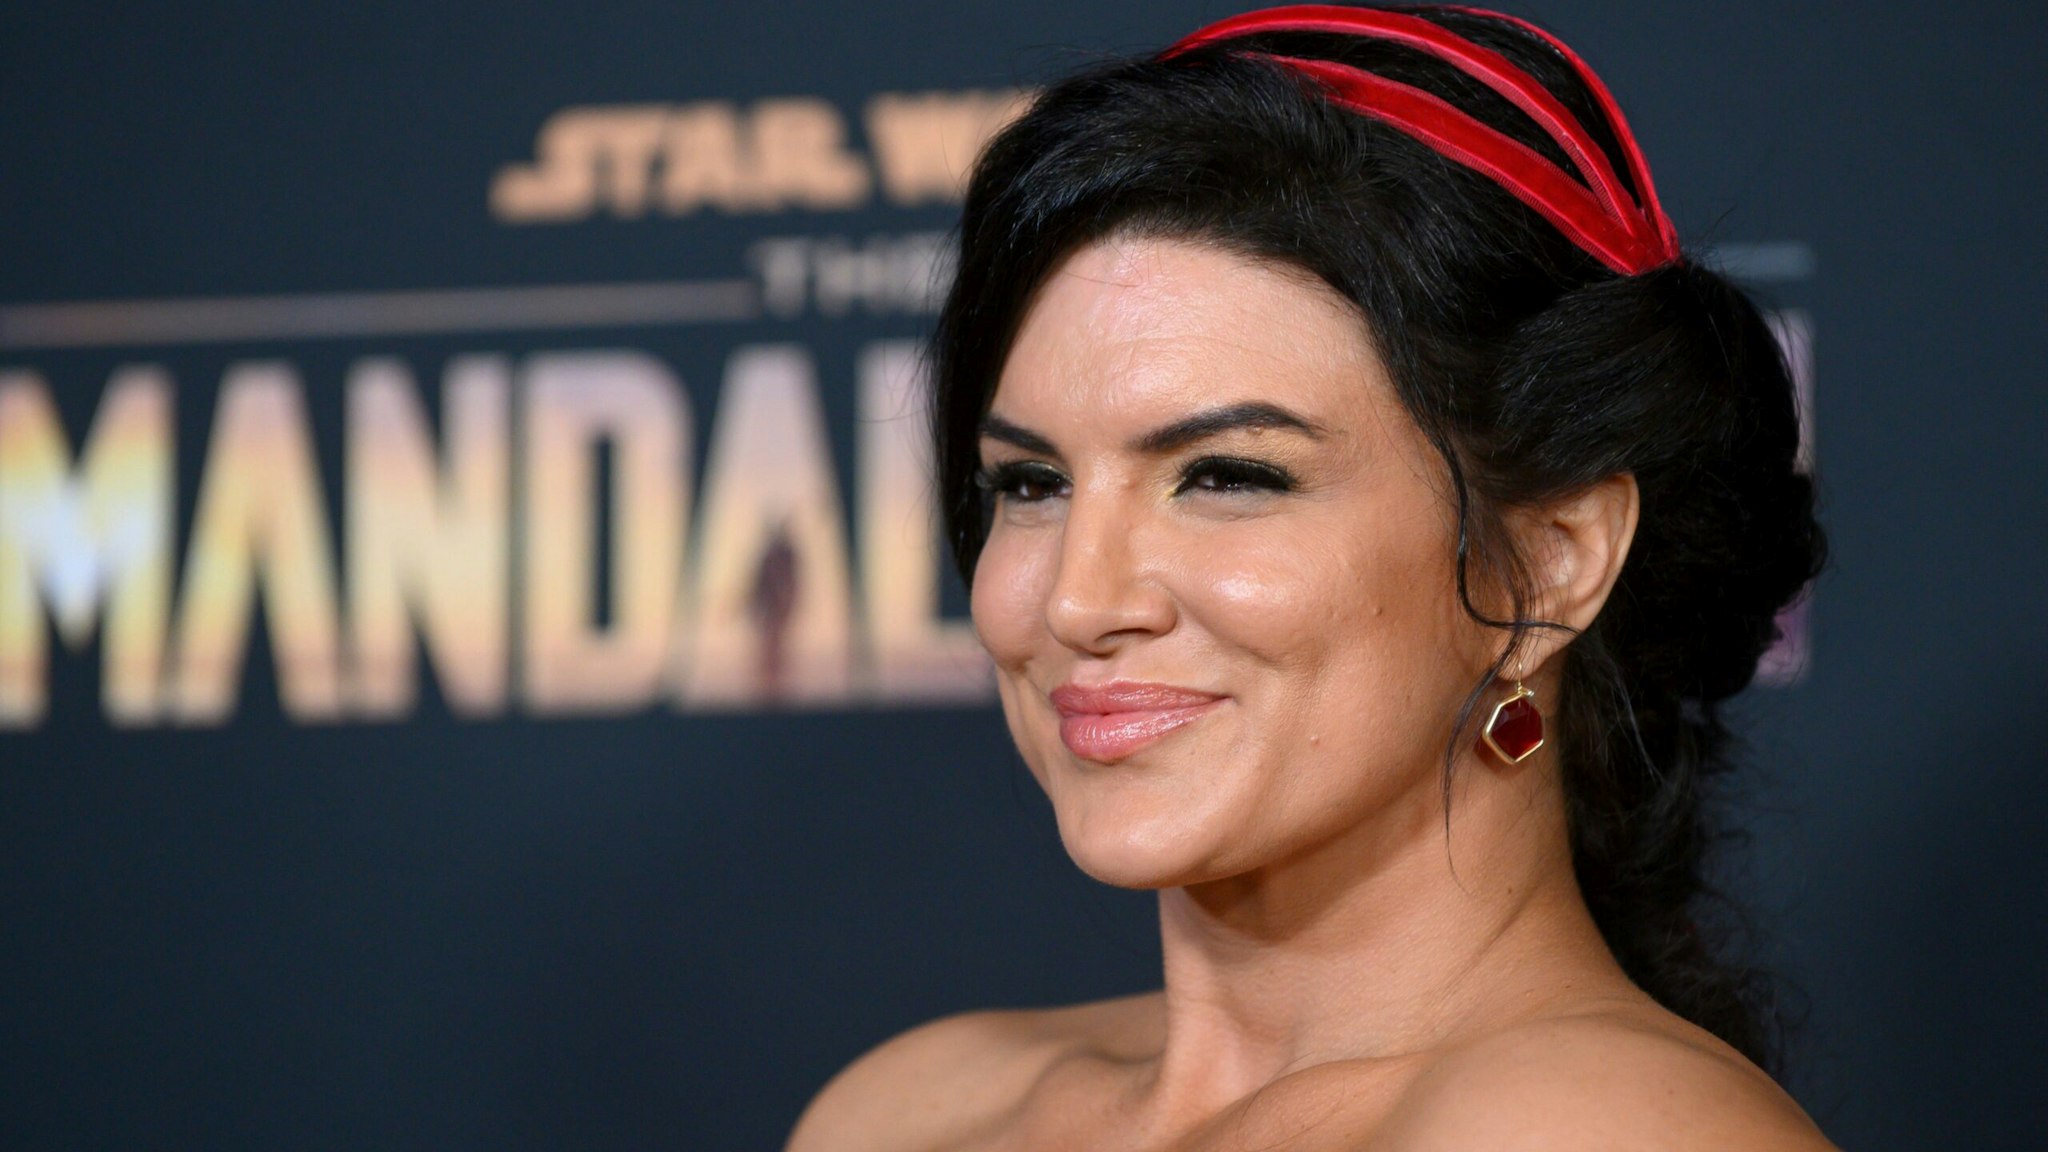 US actress Gina Carano arrives for Disney+ World Premiere of "The Mandalorian" at El Capitan theatre in Hollywood on November 13, 2019. (Photo by Nick Agro / AFP) (Photo by NICK AGRO/AFP via Getty Images)